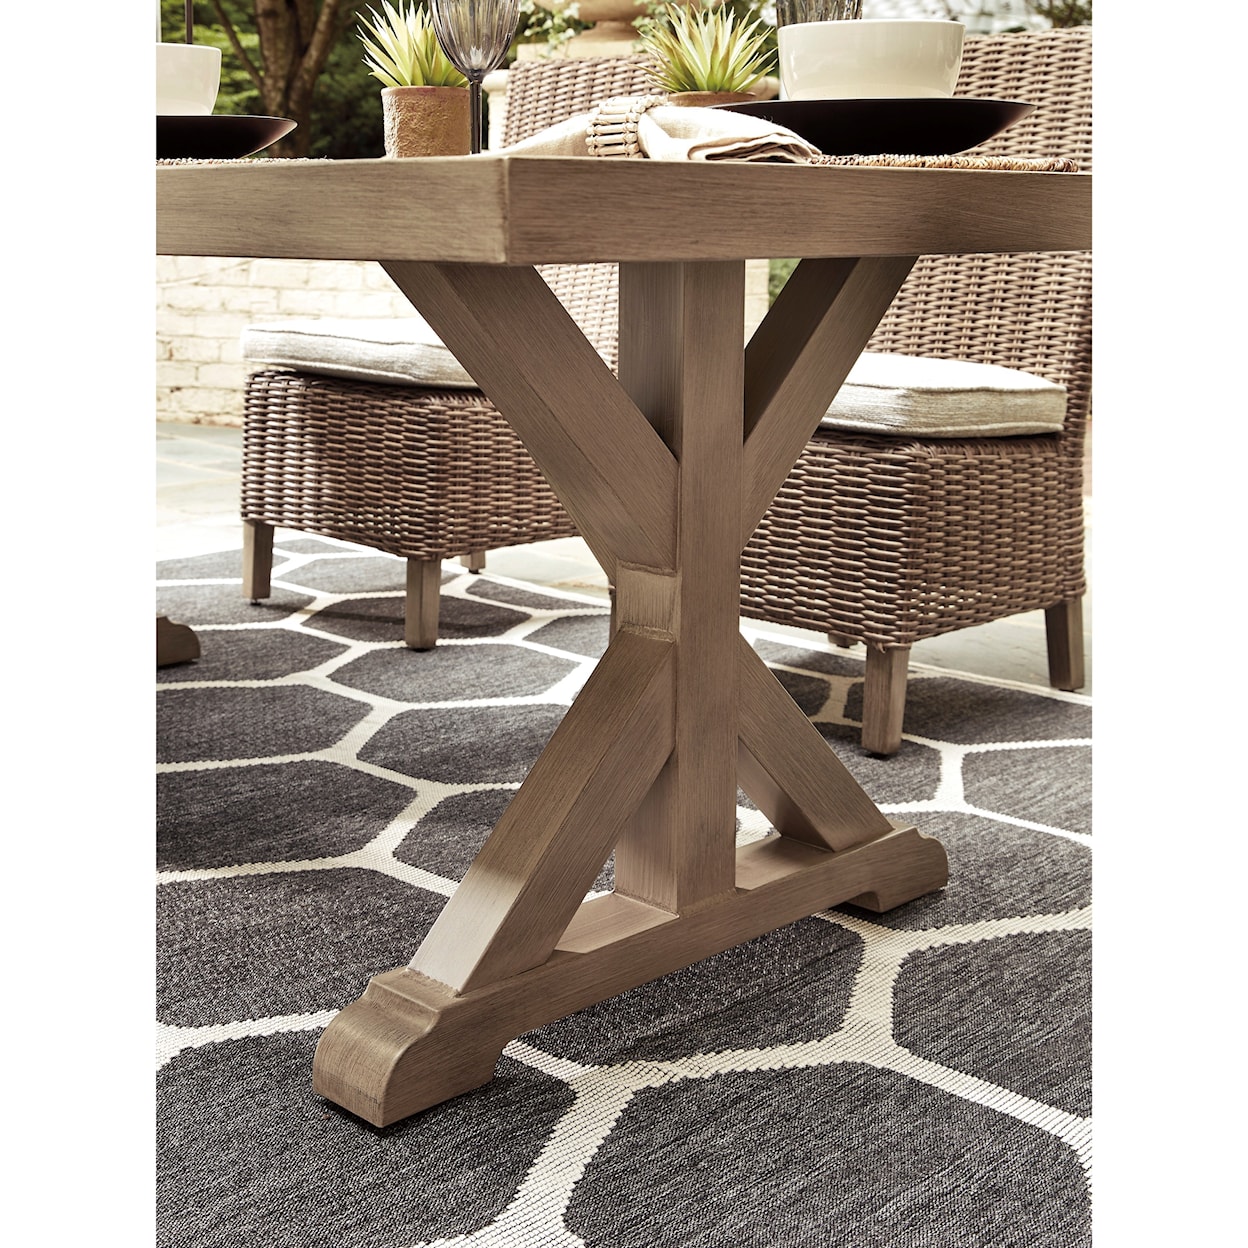 Signature Design by Ashley Beachcroft Dining Table